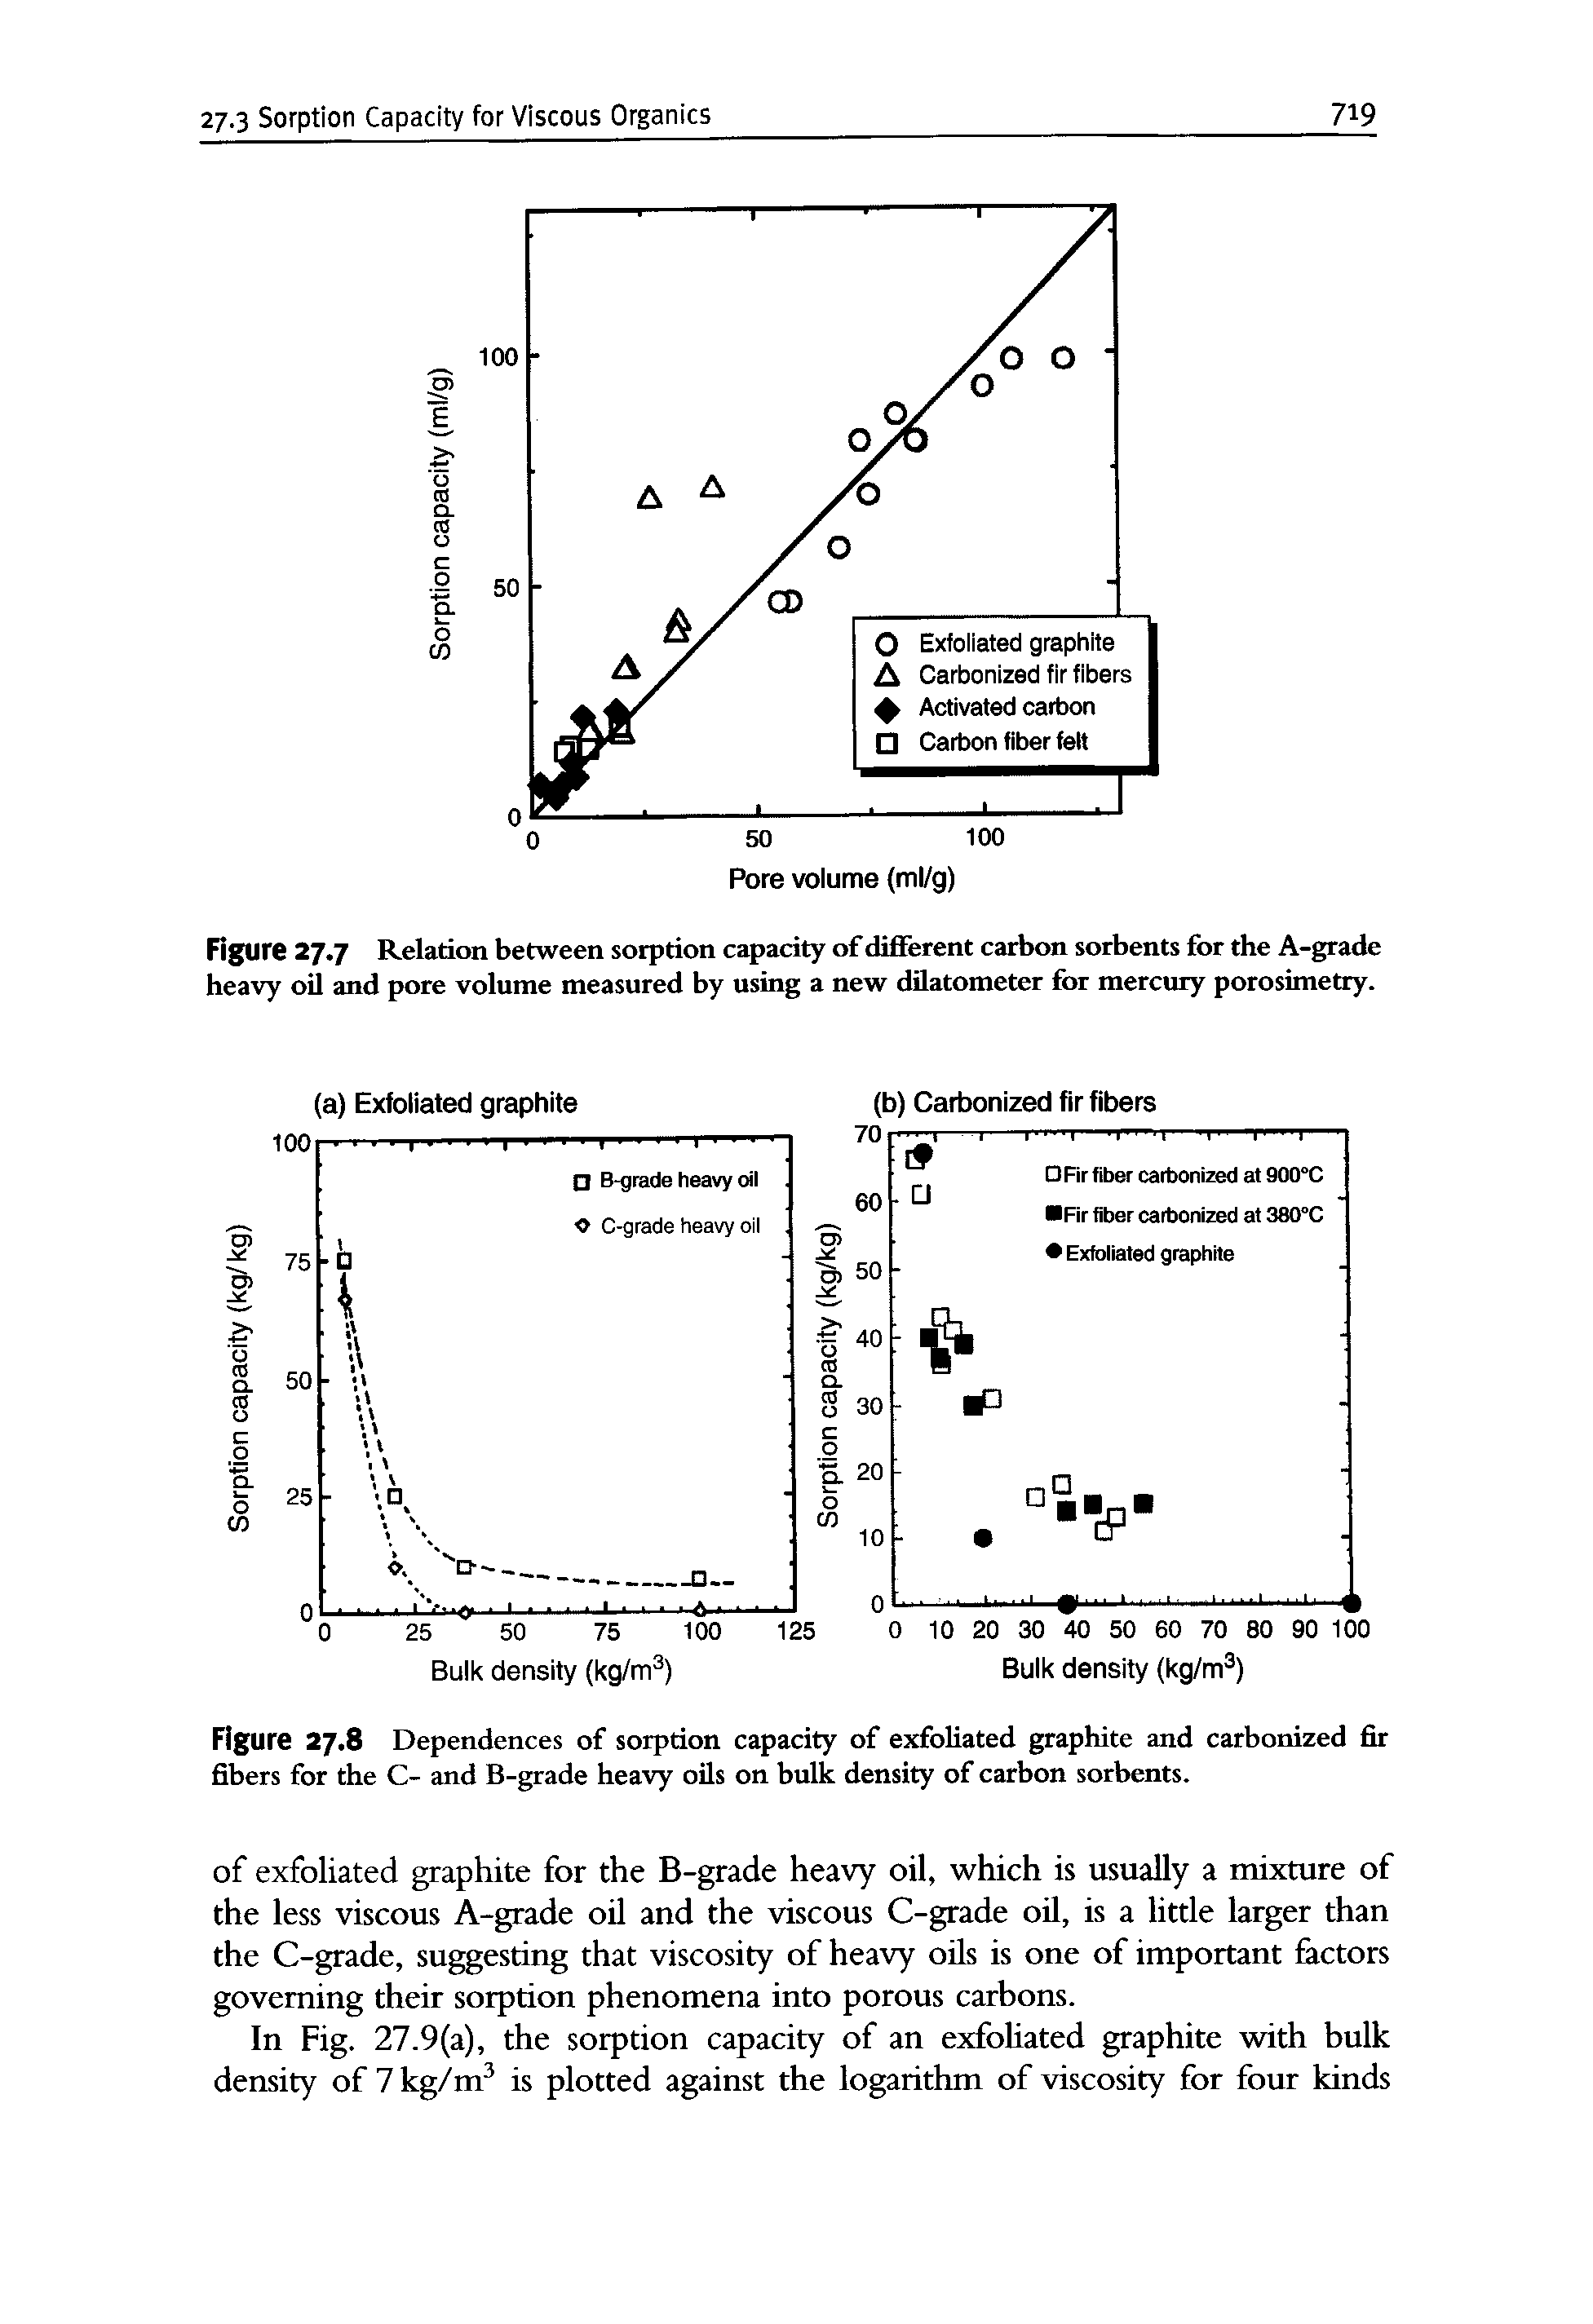 Figure 27.7 Relation between sorption capacity of difierent carbon sorbents for the A-grade heavy oil and pore volume measured by using a new dilatometer for mercury porosimetry.